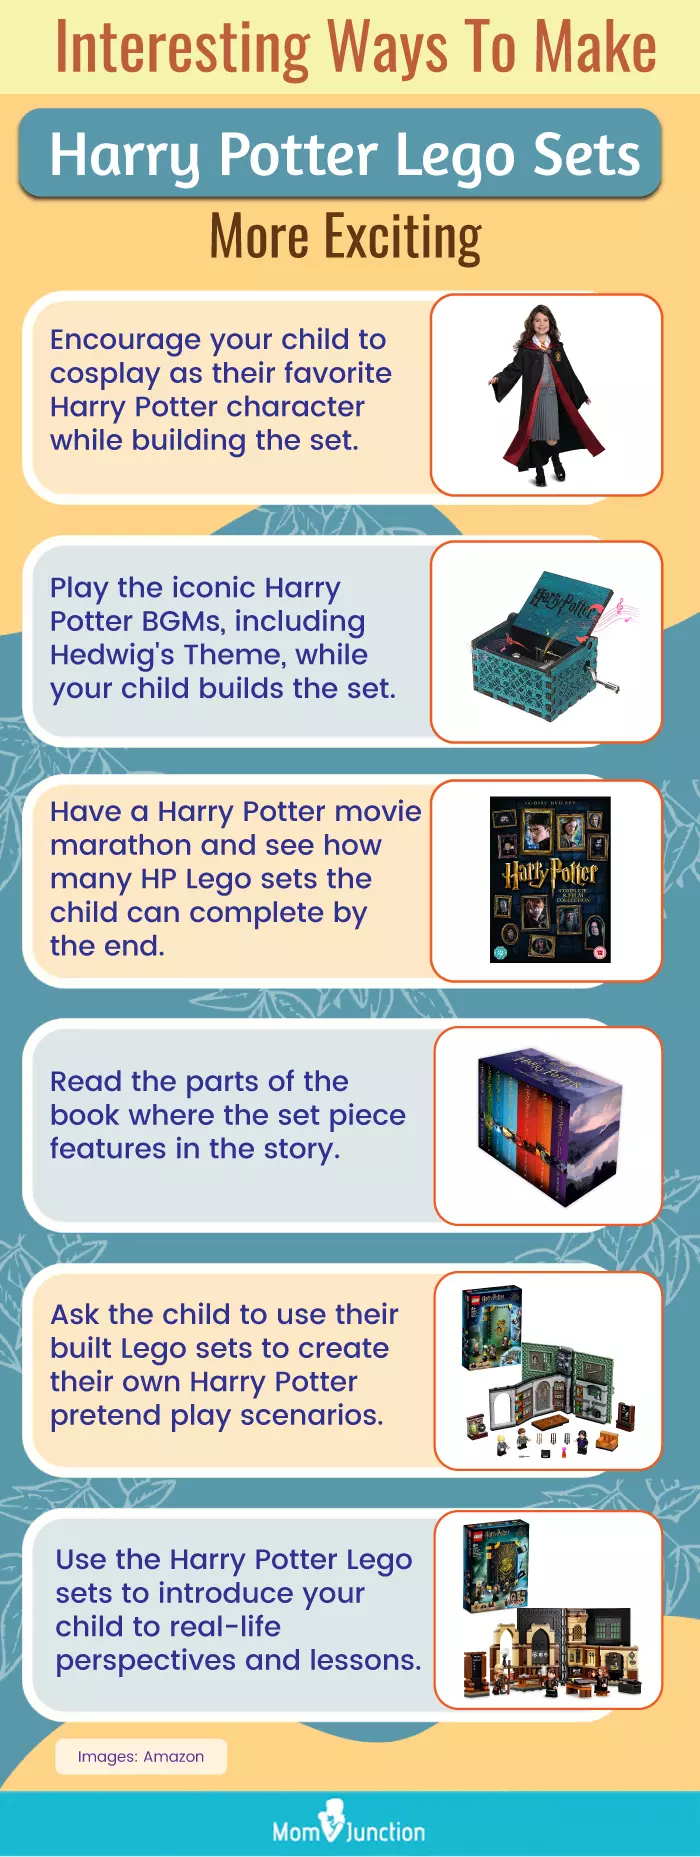 Interesting Ways To Make Harry Potter Lego Sets More Exciting (infographic)